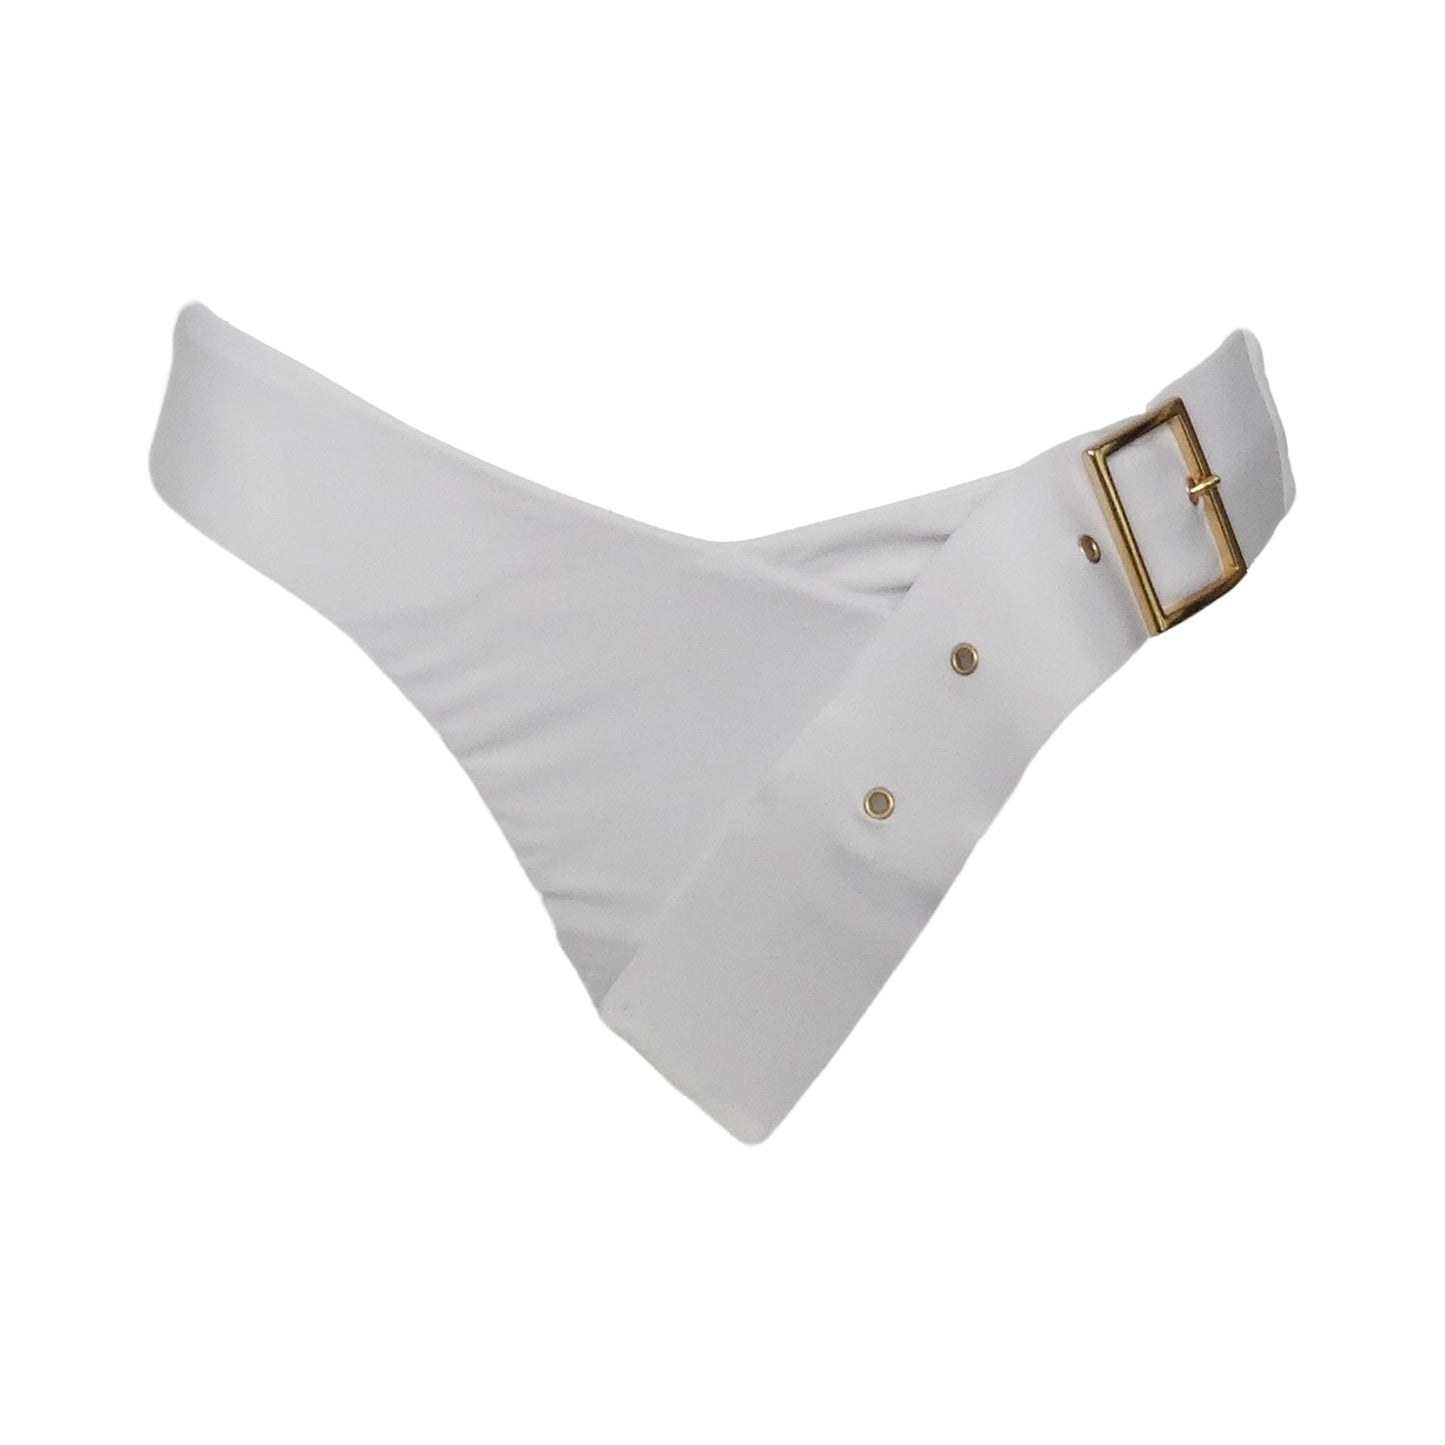 White low rise bikini bottom with left side adjustable gold belt buckle strap and cheeky bum coverage.